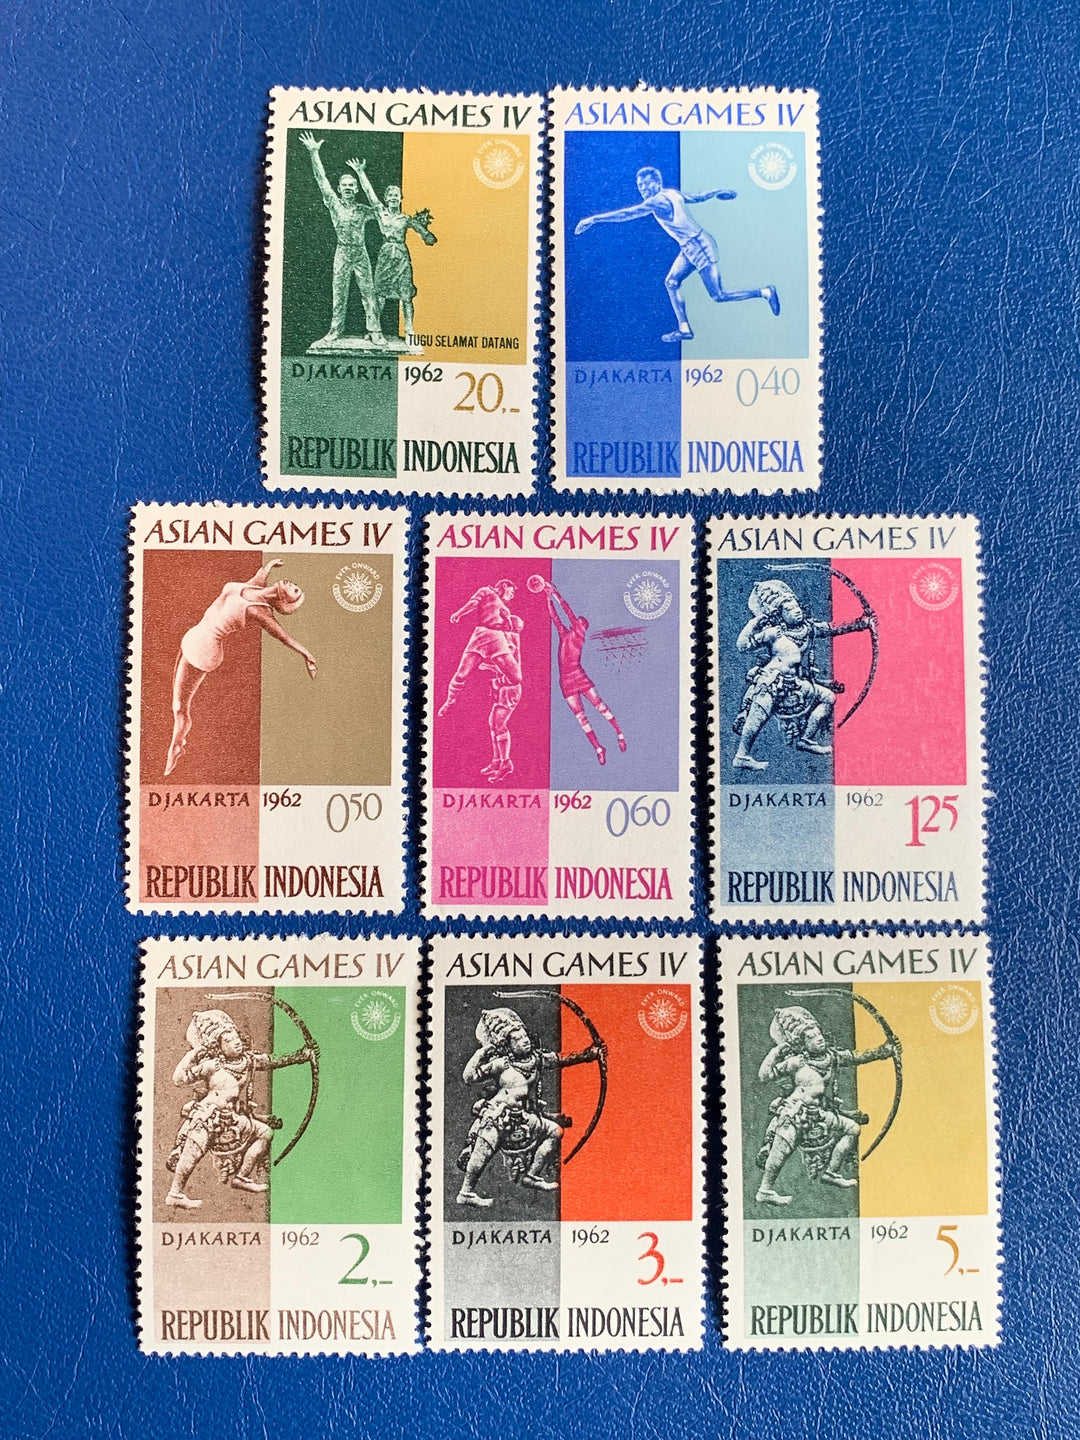 Indonesia - Original Vintage Postage Stamps- 1962 Asian Games - for the collector, artist or collector